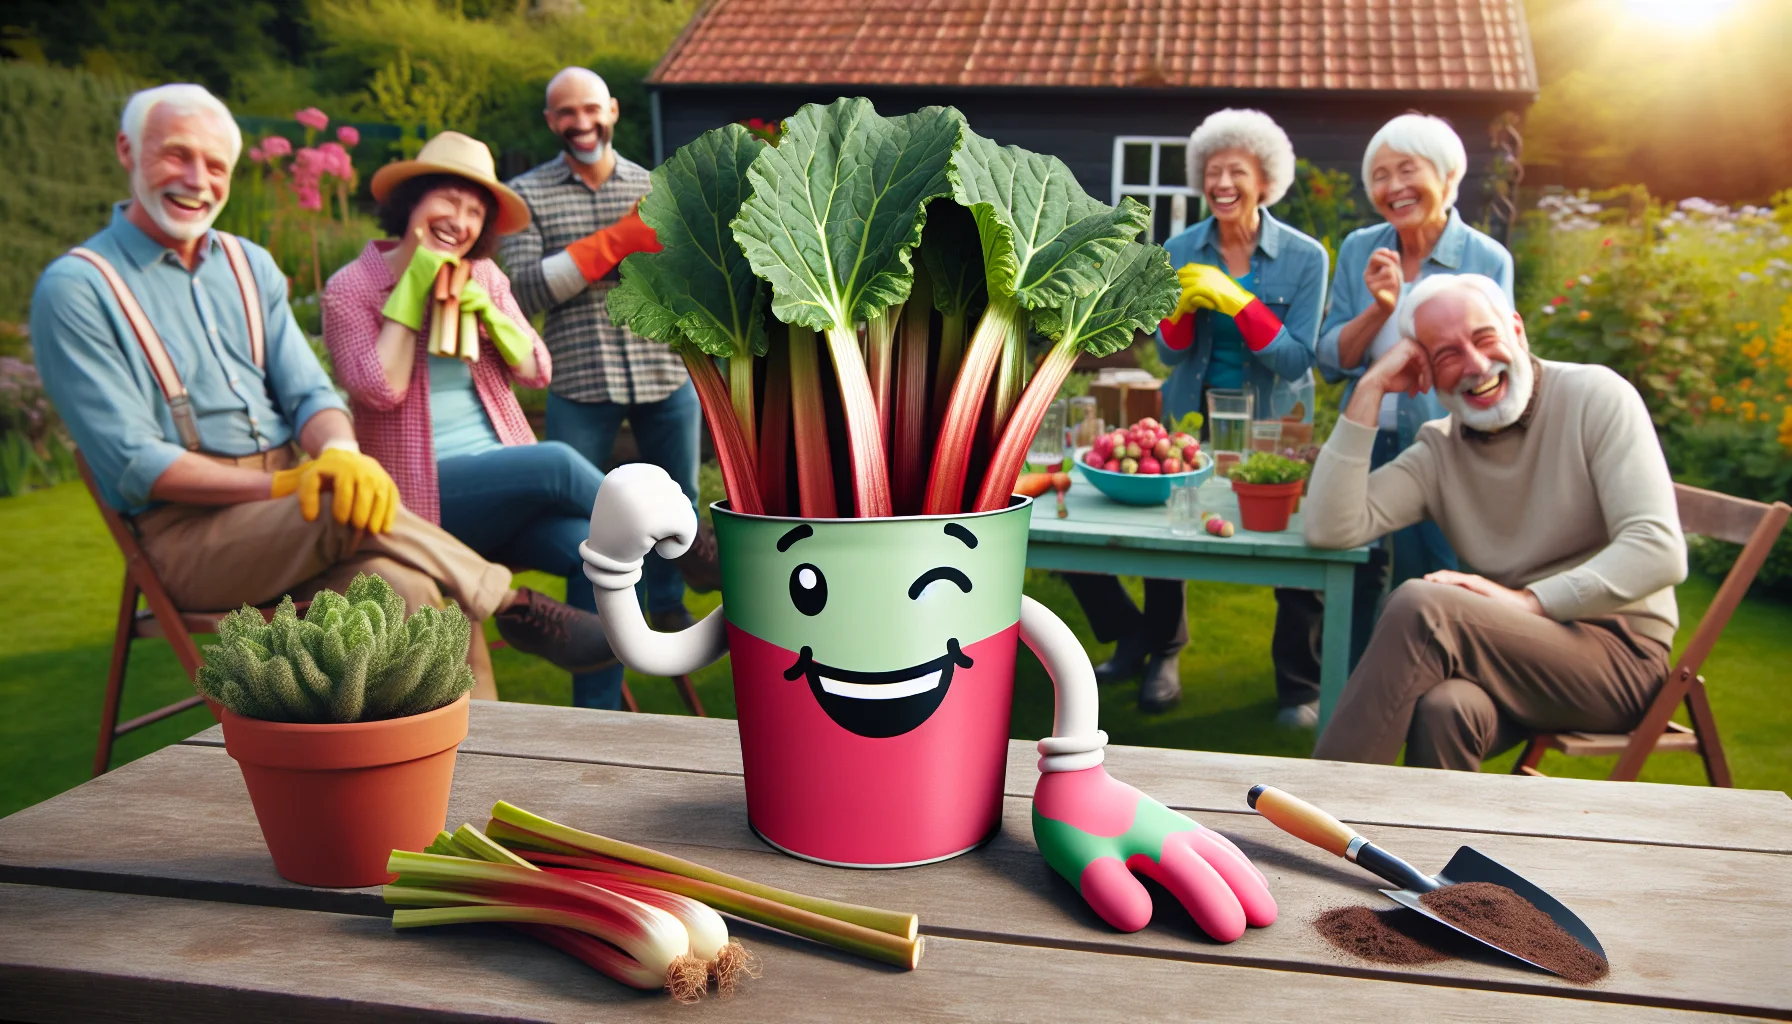 Think about a humorous scene which involves gardening and growing rhubarb. Picture a sunny garden space where a big bag of rhubarb fertilizer sits grandly on a garden table. This bag of fertilizer is unique: it has cute, comical, anthropomorphic traits like a friendly smile and wink, holding up the vibrant, oversized rhubarb it has helped grow. In the background, you can see diverse group of people of various ages, genders, and of different descents like Caucasian, Hispanic, and Black, all wearing gardening gloves and hats, amused and laughing at the scene.